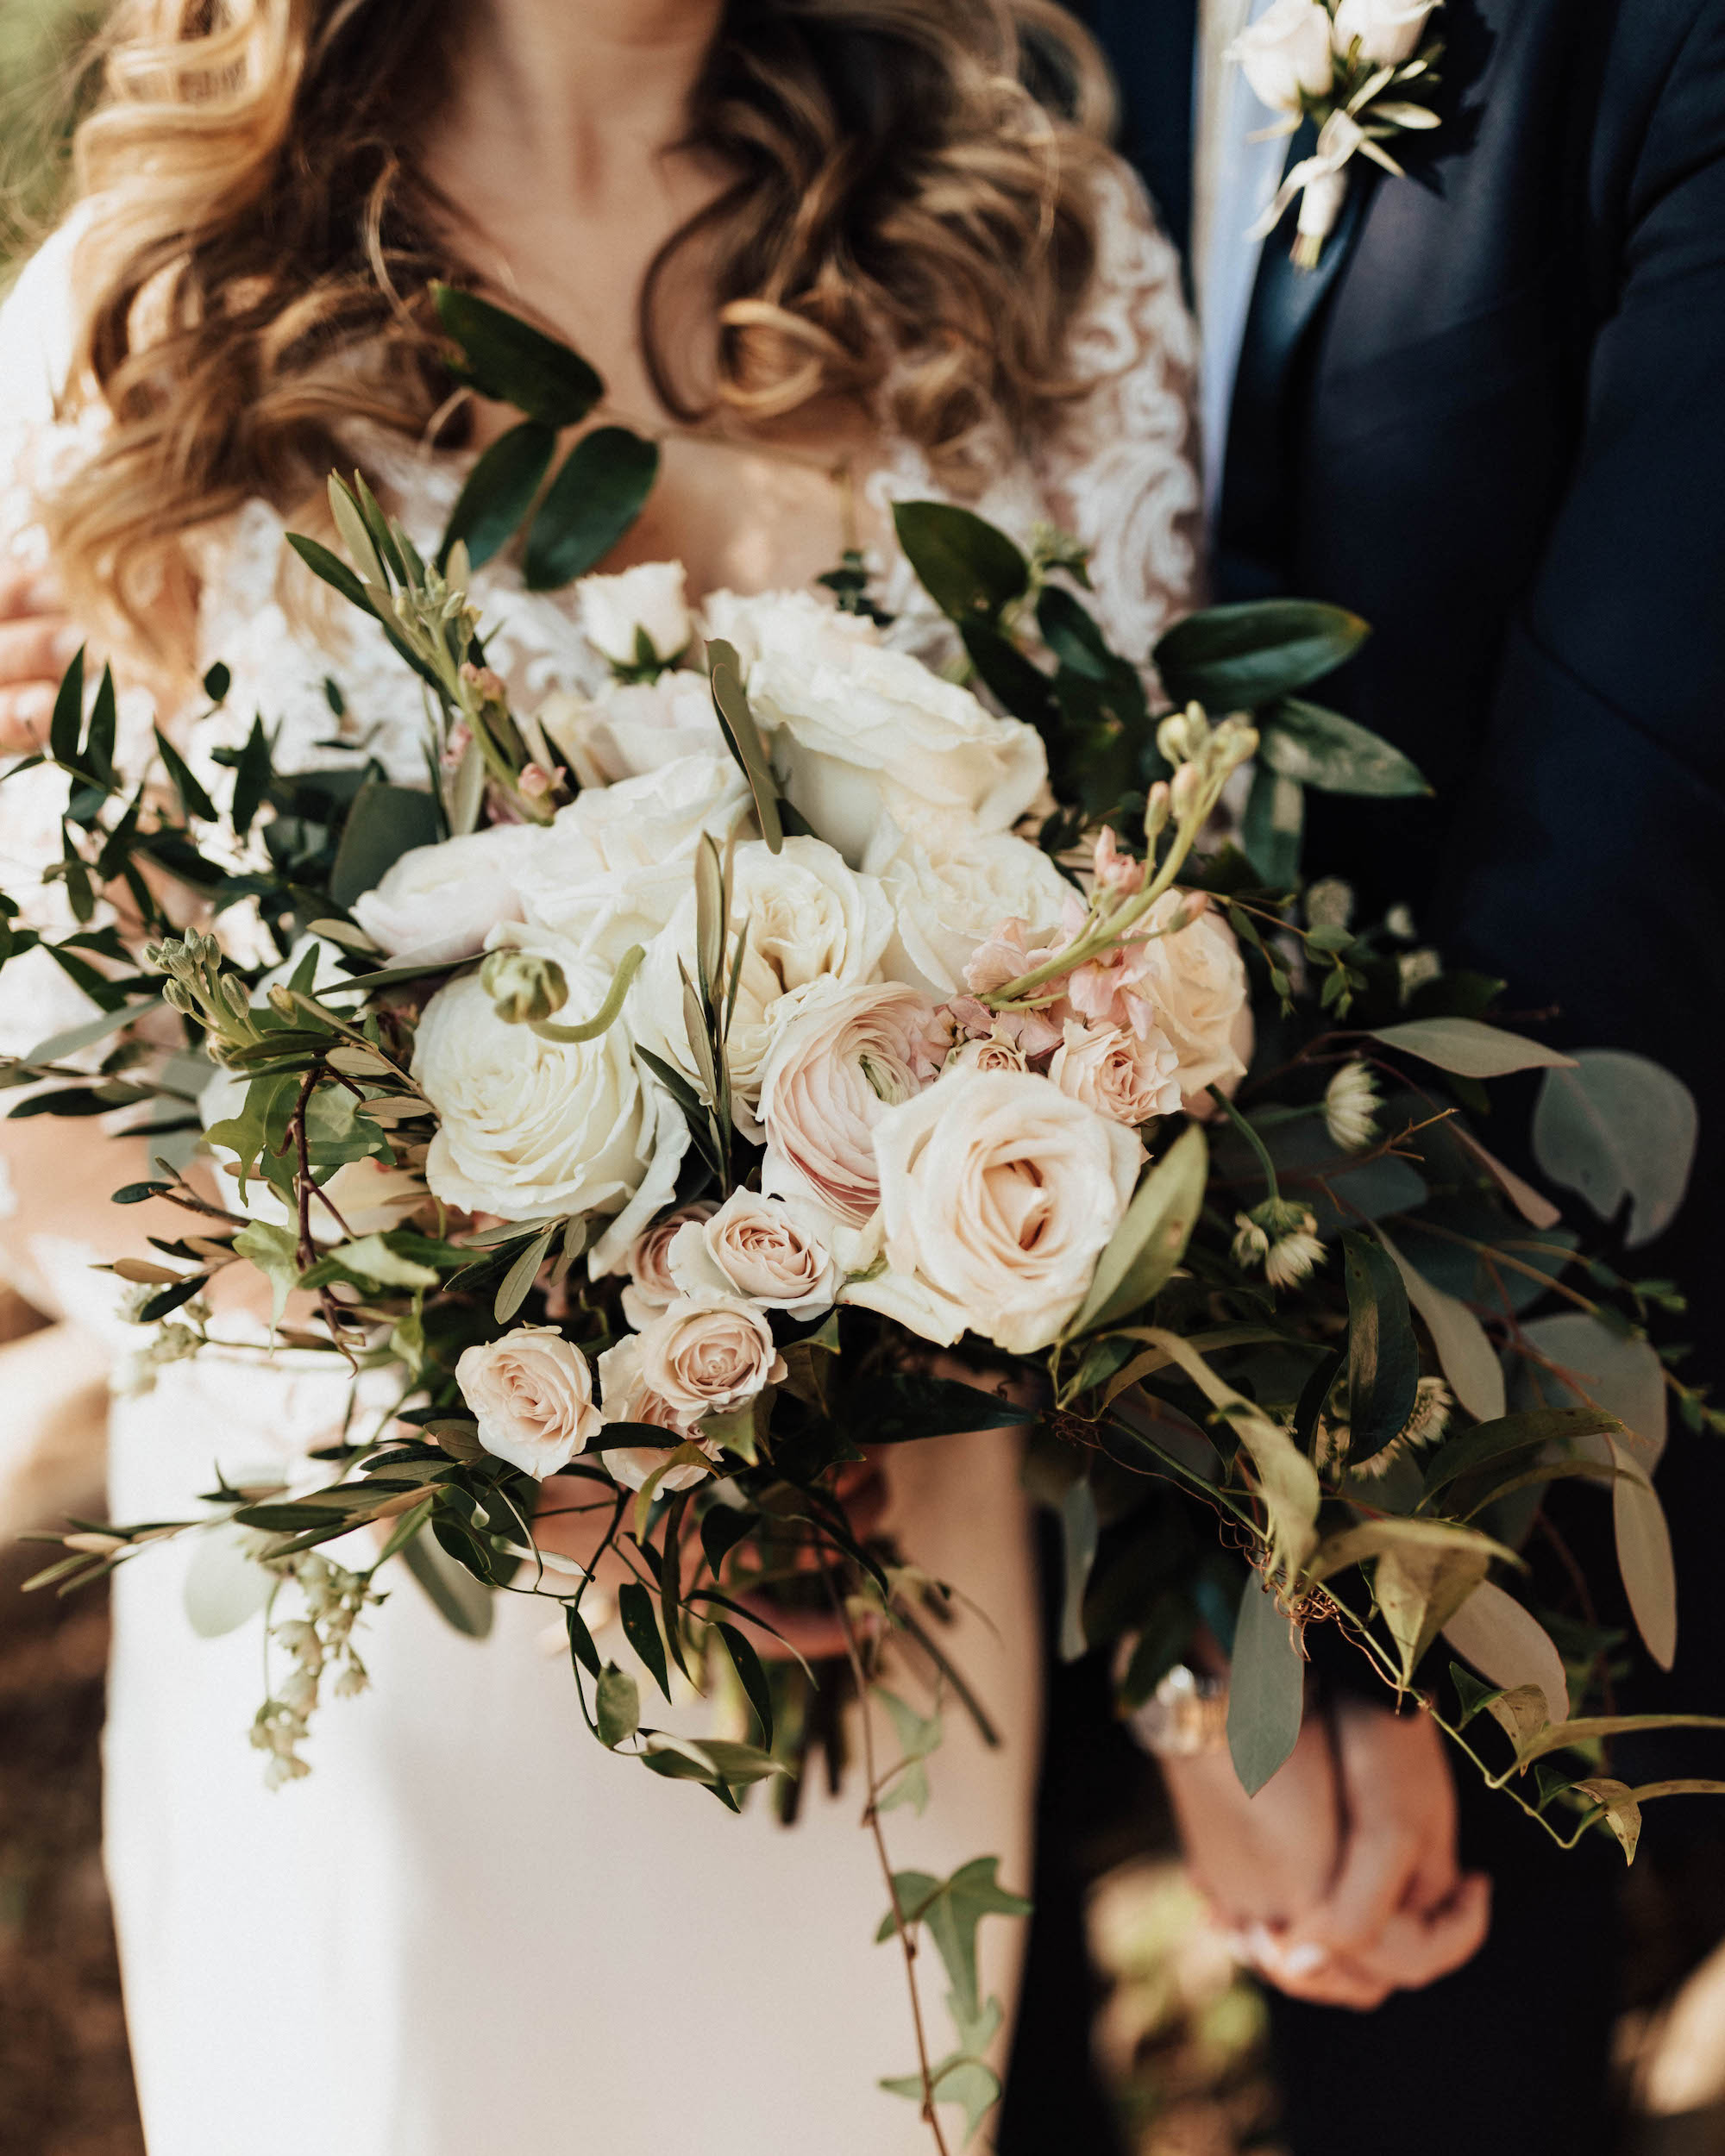 White Blush and Cream Floral Bouquets with Greenery Details